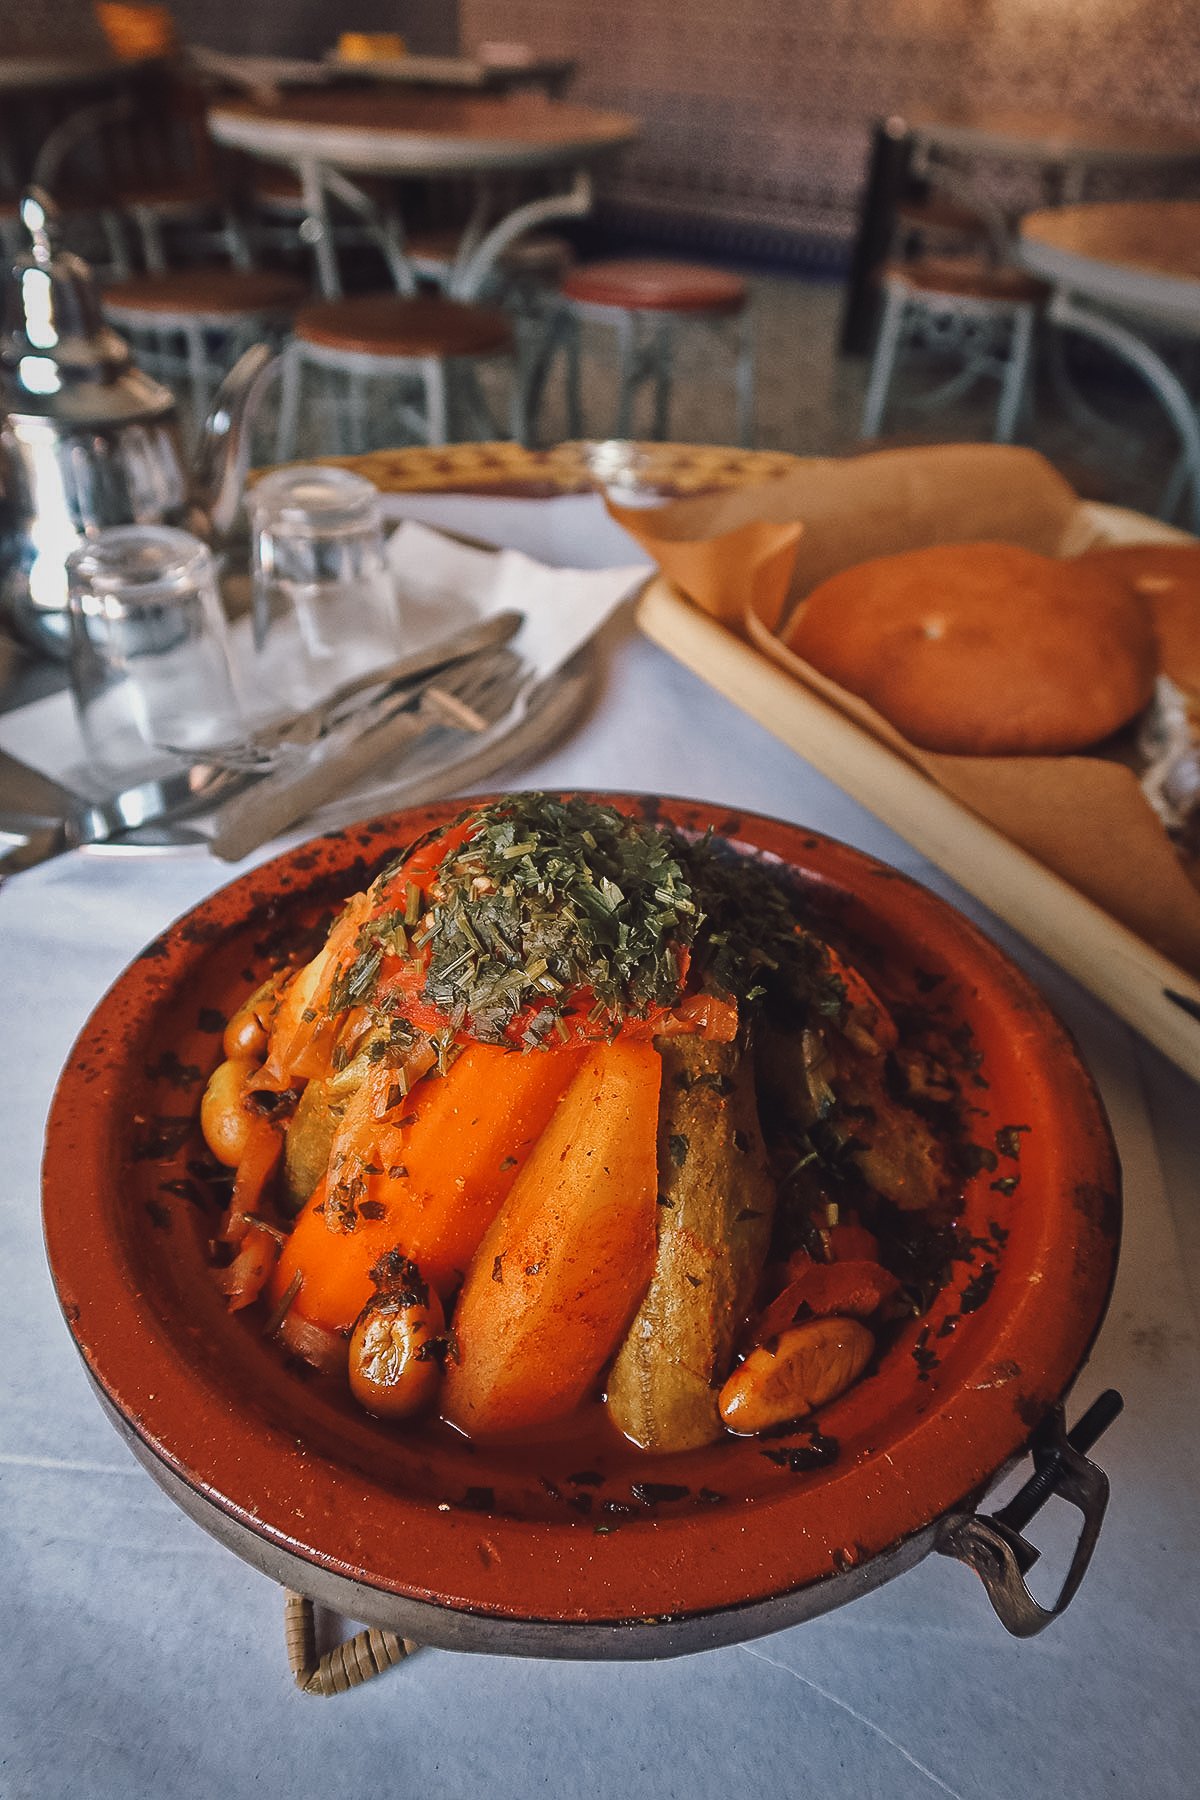 Vegetable tagine at a restaurant in Marrakech